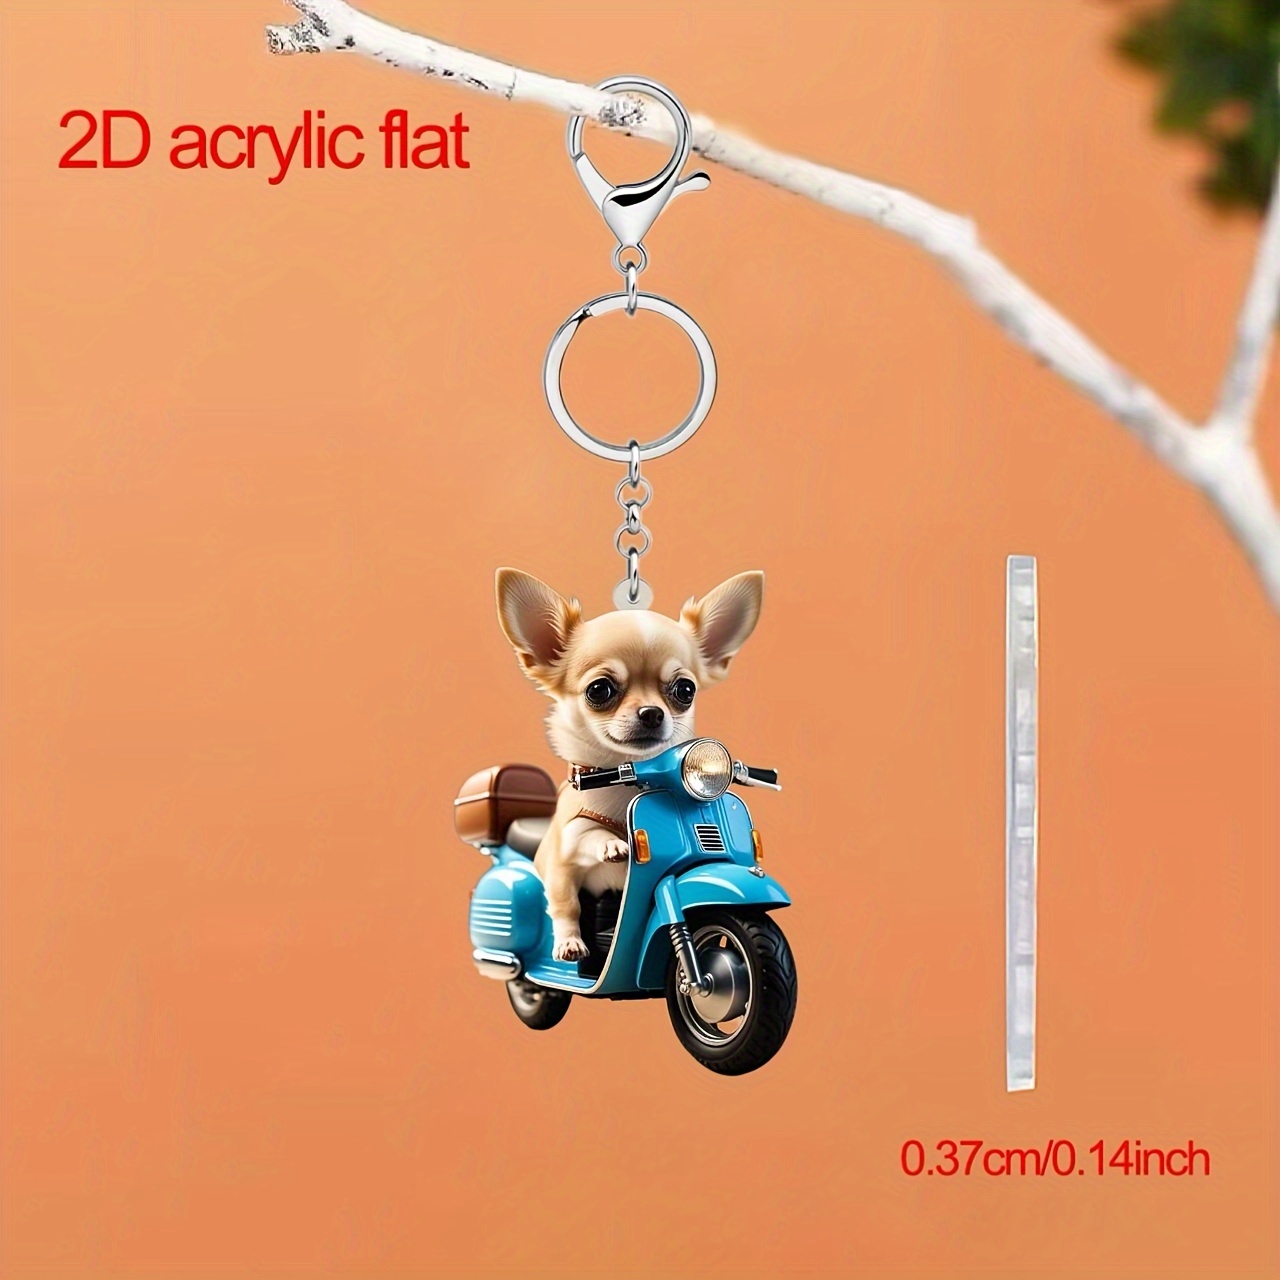 

1pc Acrylic Keychain With Chihuahua On Blue Scooter, Cute Brave Puppy Dog Charm, Animal Pet Accessory For Car Keys, Wallet, Backpack Decoration Gift